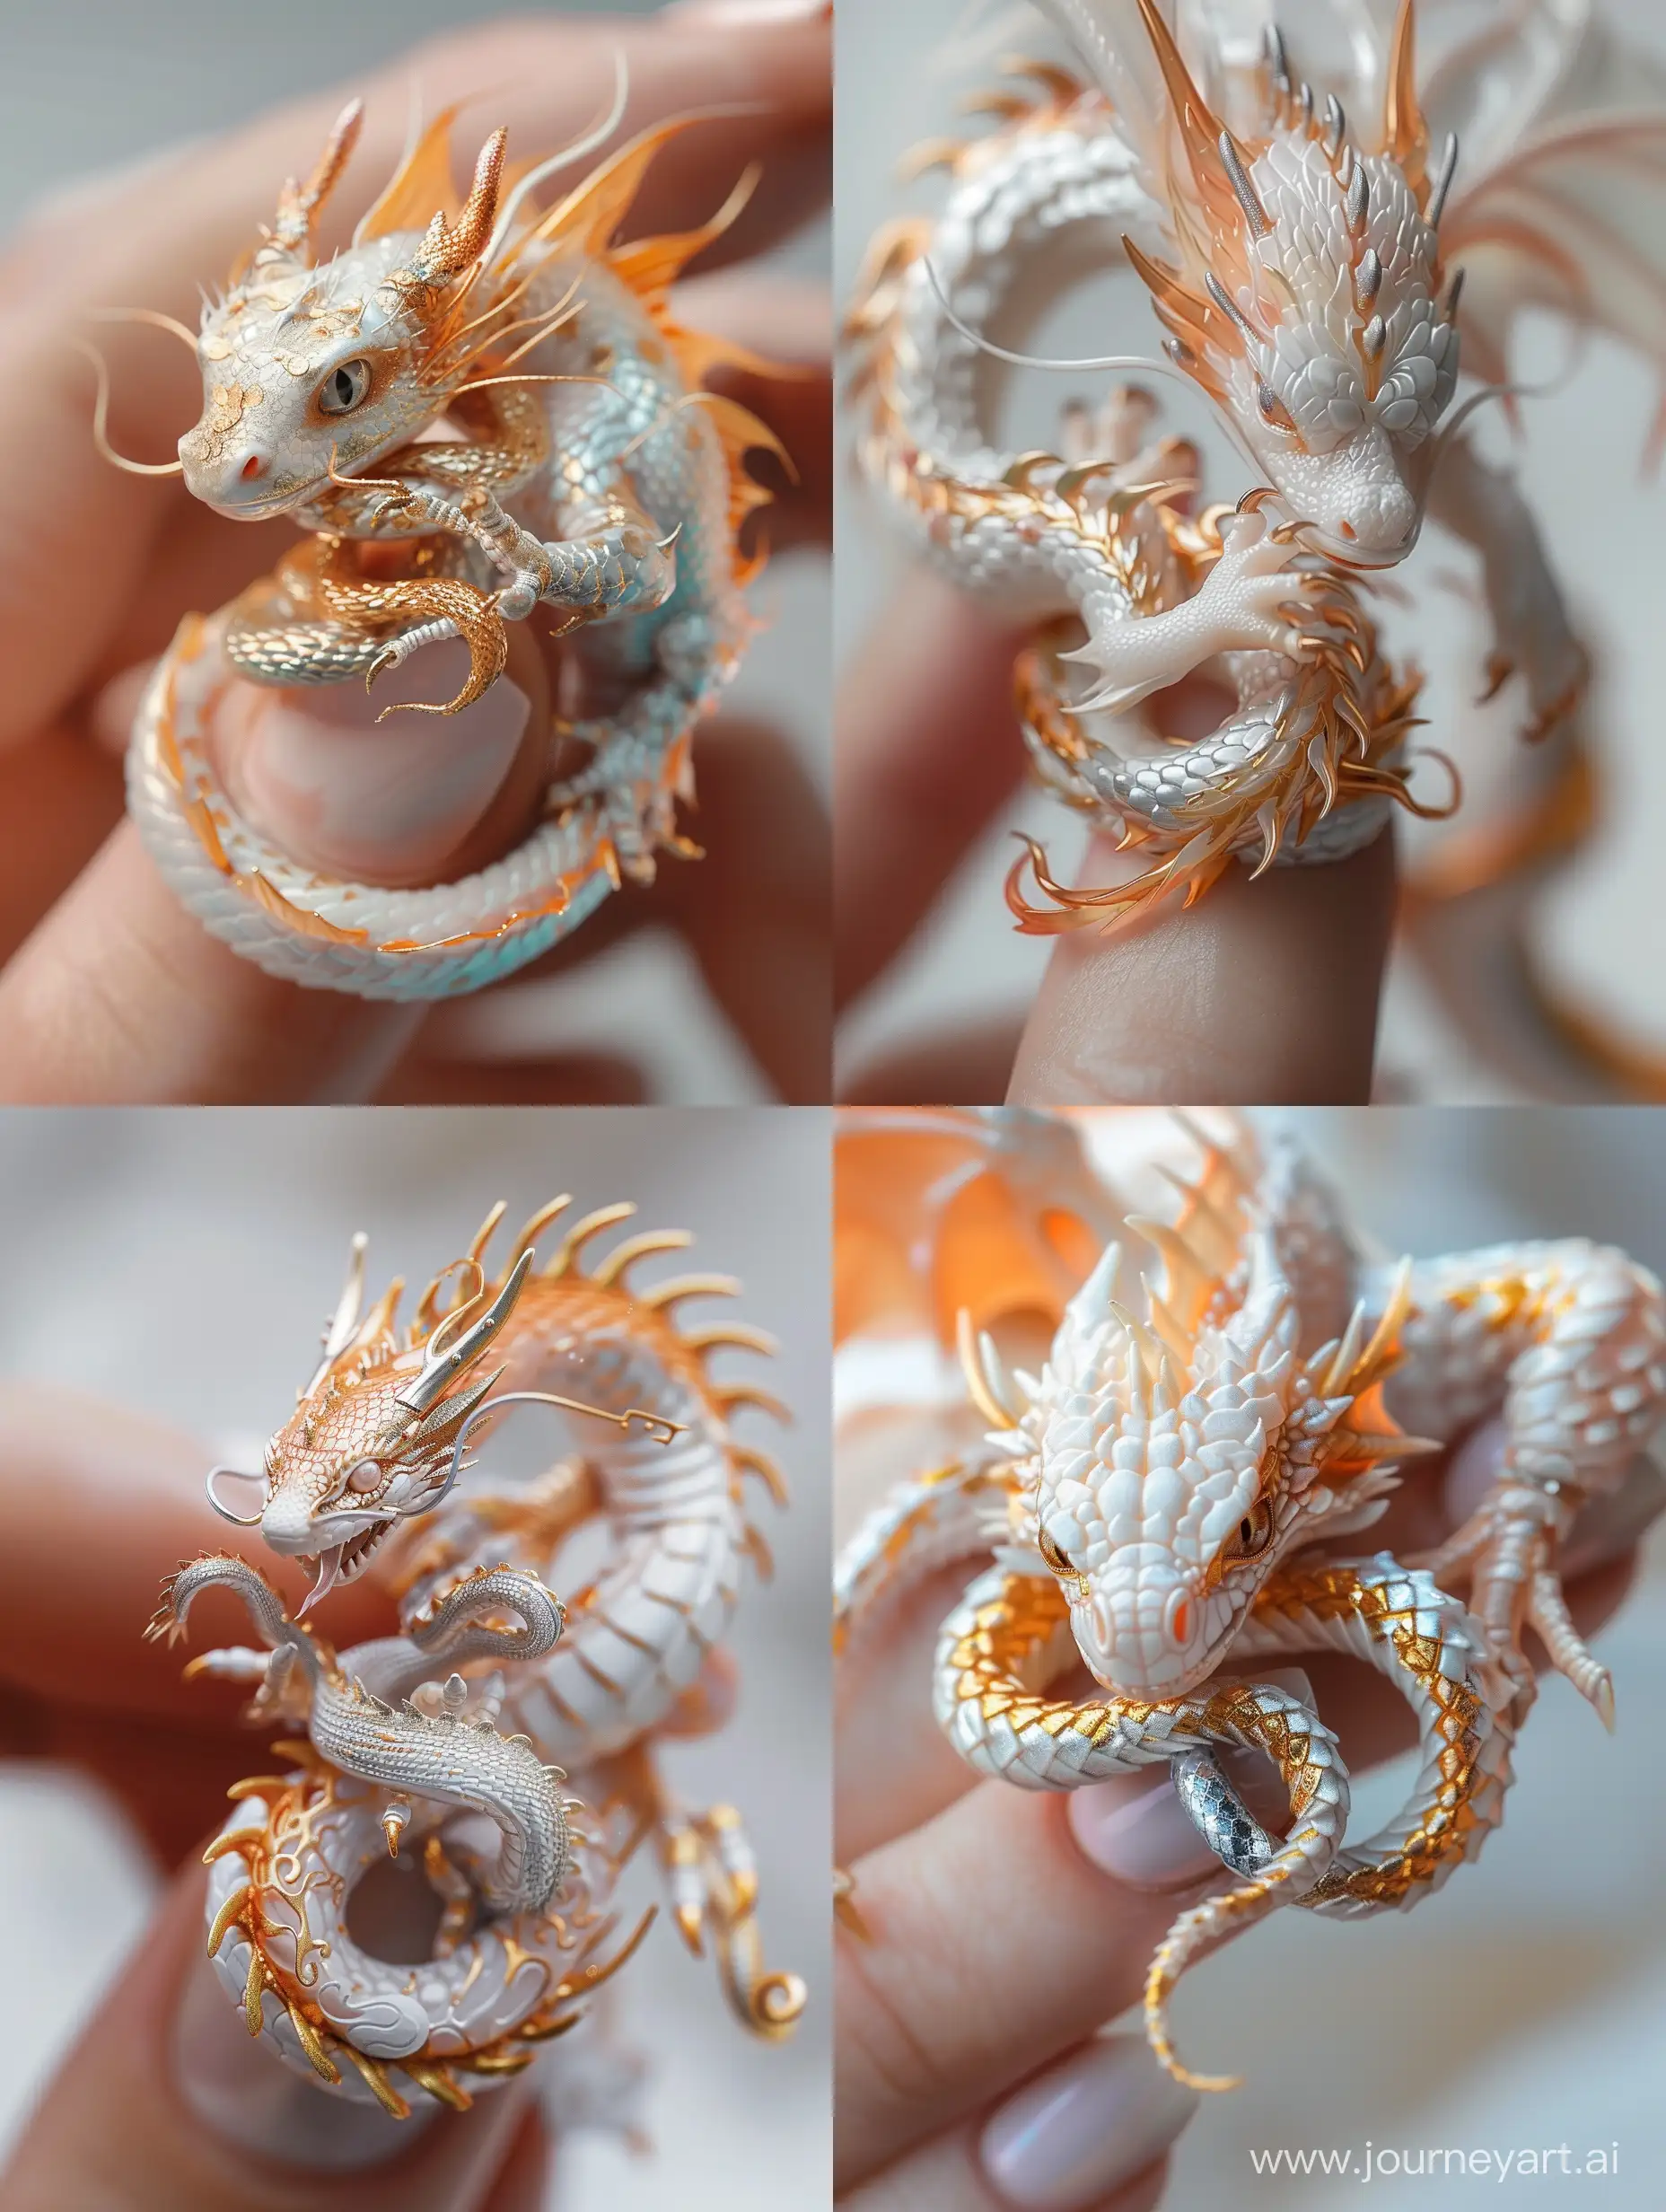 create image: close-up, miniature dragon with gold and silver snakes around a woman's finger, in the style of realistic hyper-detailed portraits, light white and light orange, realistic hyper-detail, magewave, precisionist lines